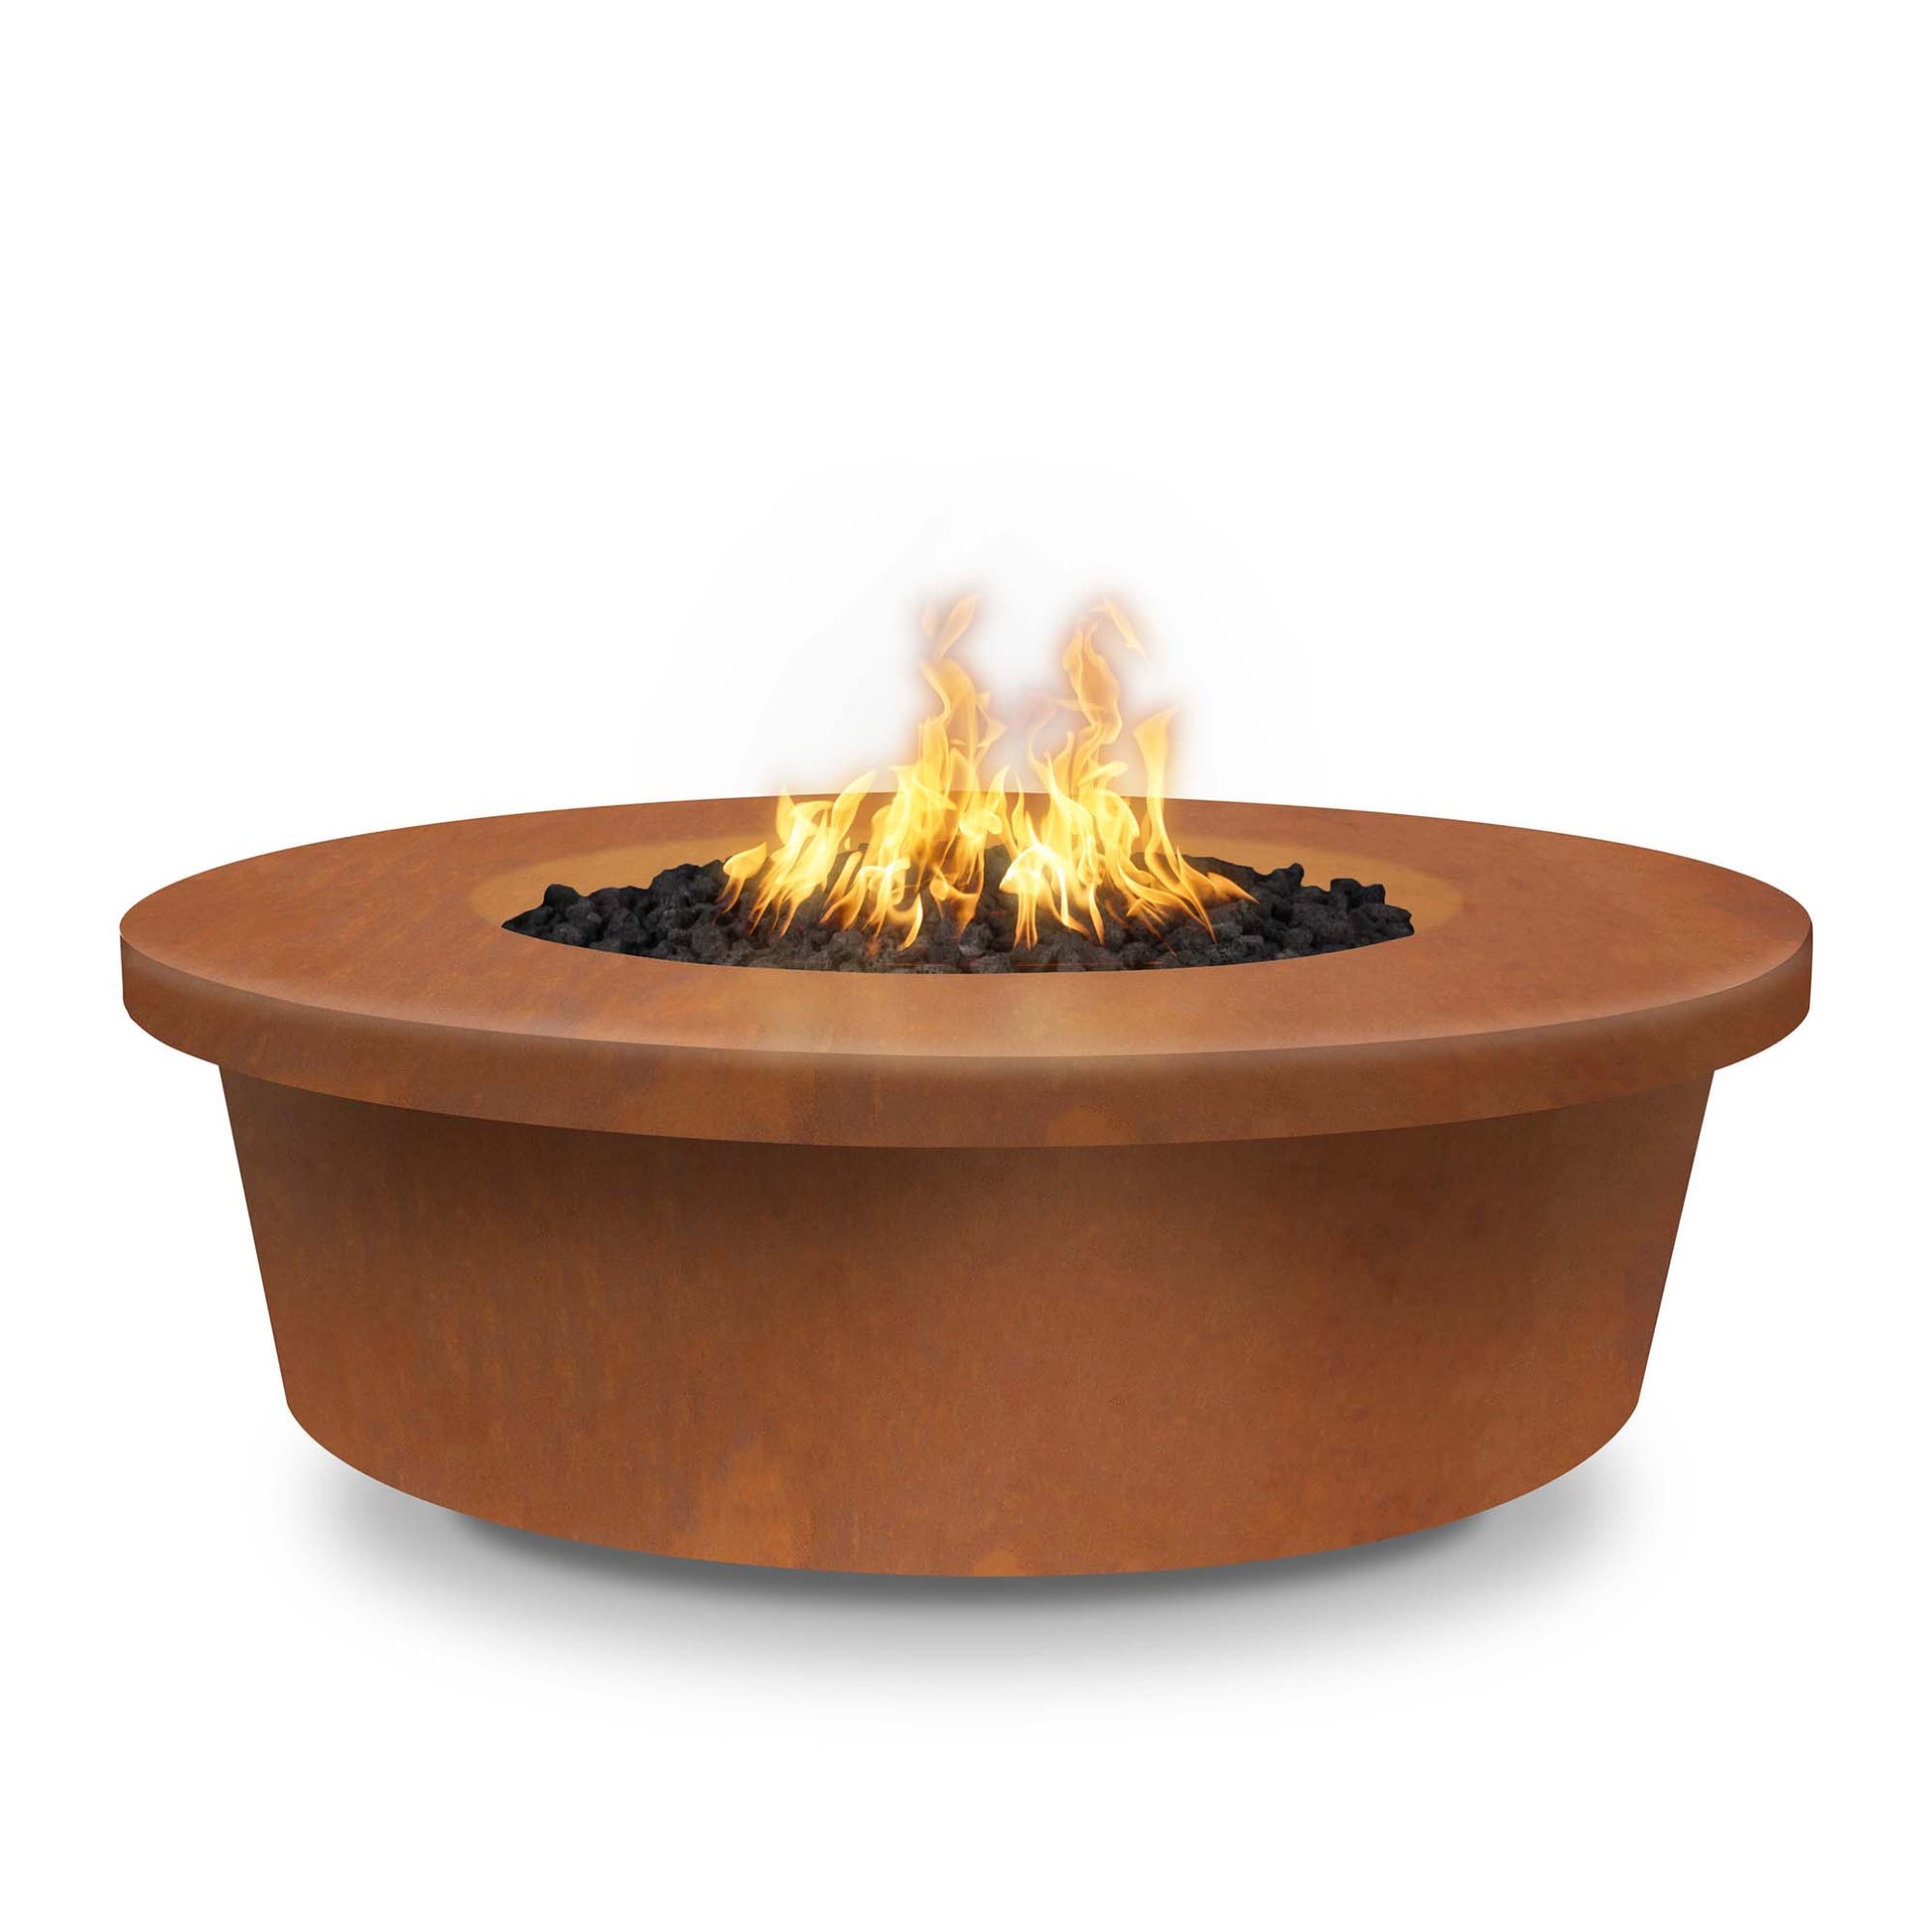 The Outdoor Plus Round Tempe 48" Hammered Copper Liquid Propane Fire Pit with 12V Electronic Ignition